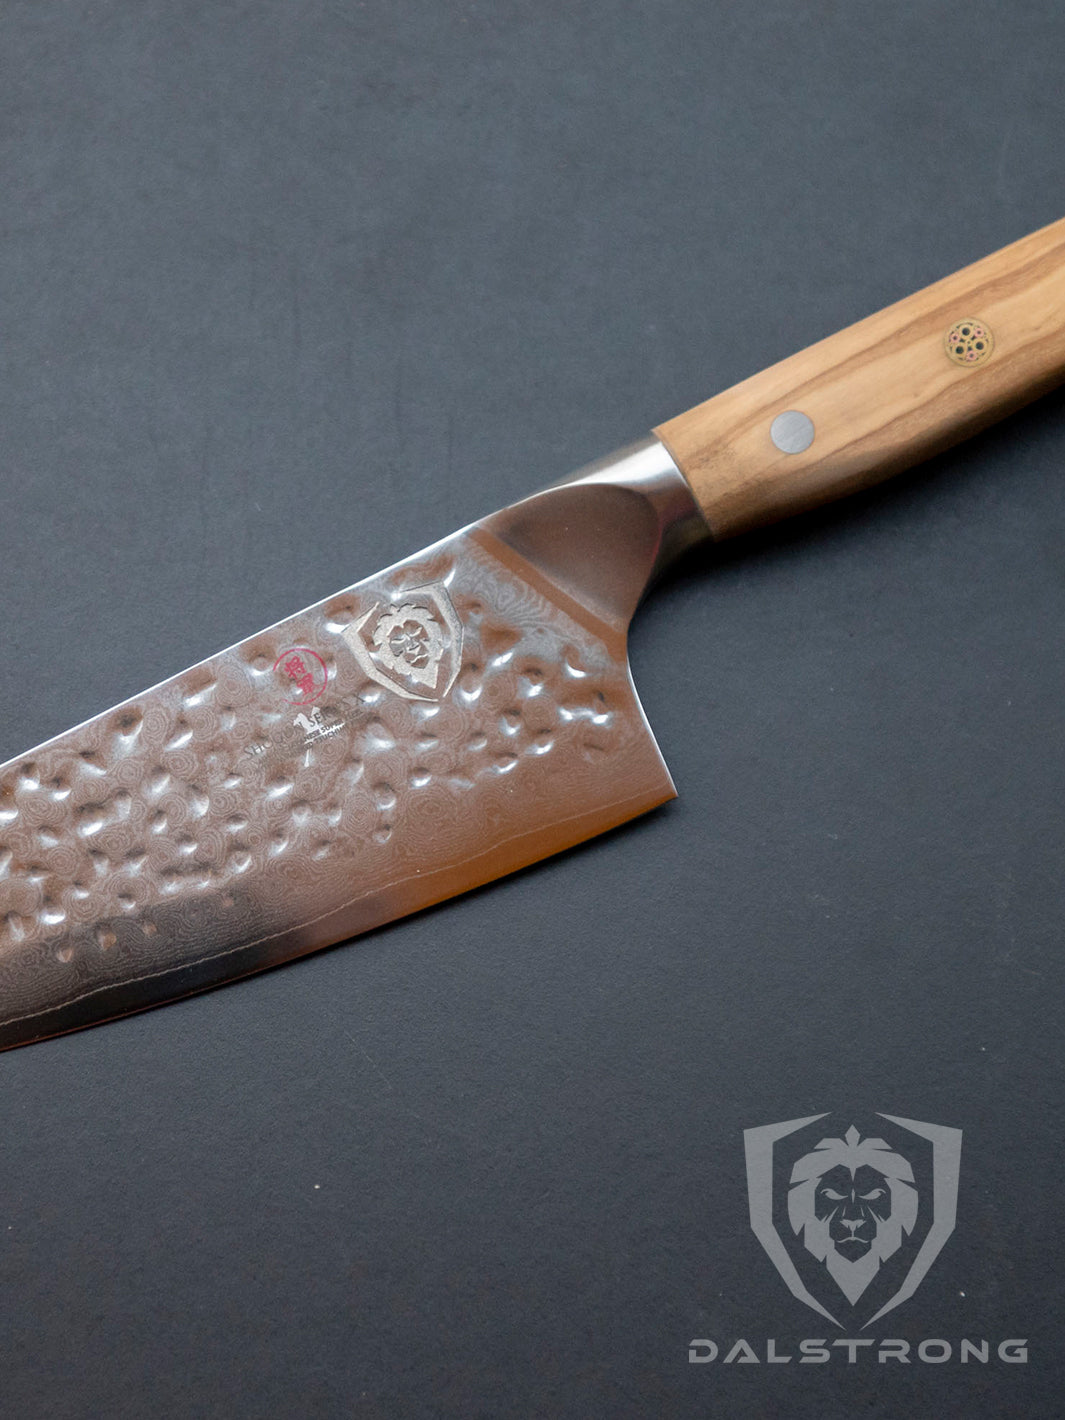 Dalstrong shogun series 8 inch chef knife with olive wood handle in a rough surface.